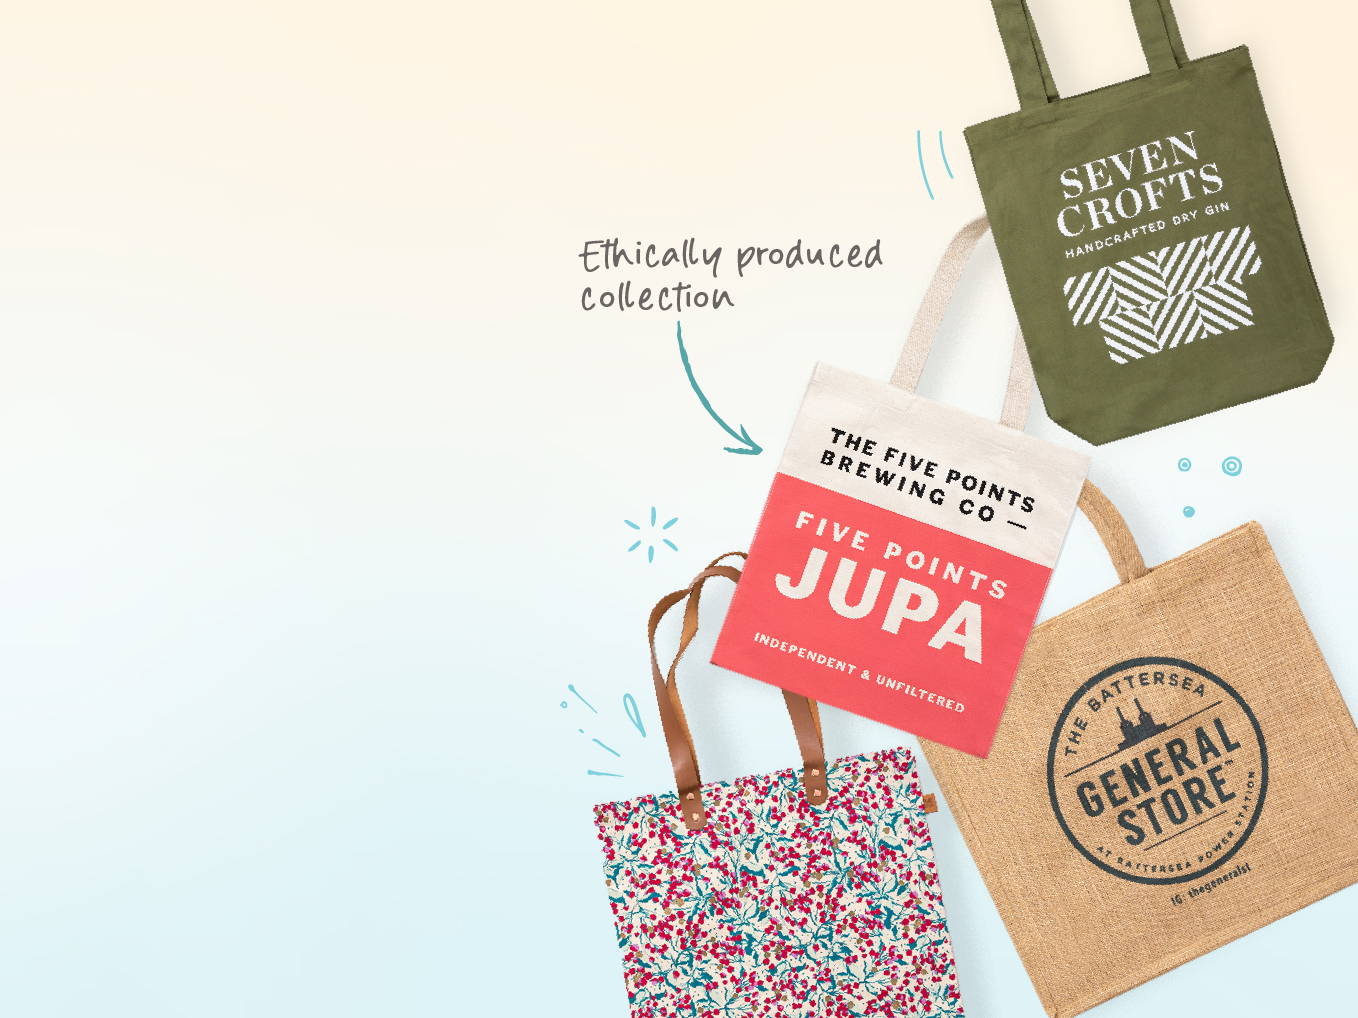 All about bags - four personalised bags with logos and the text Ethically produced collection